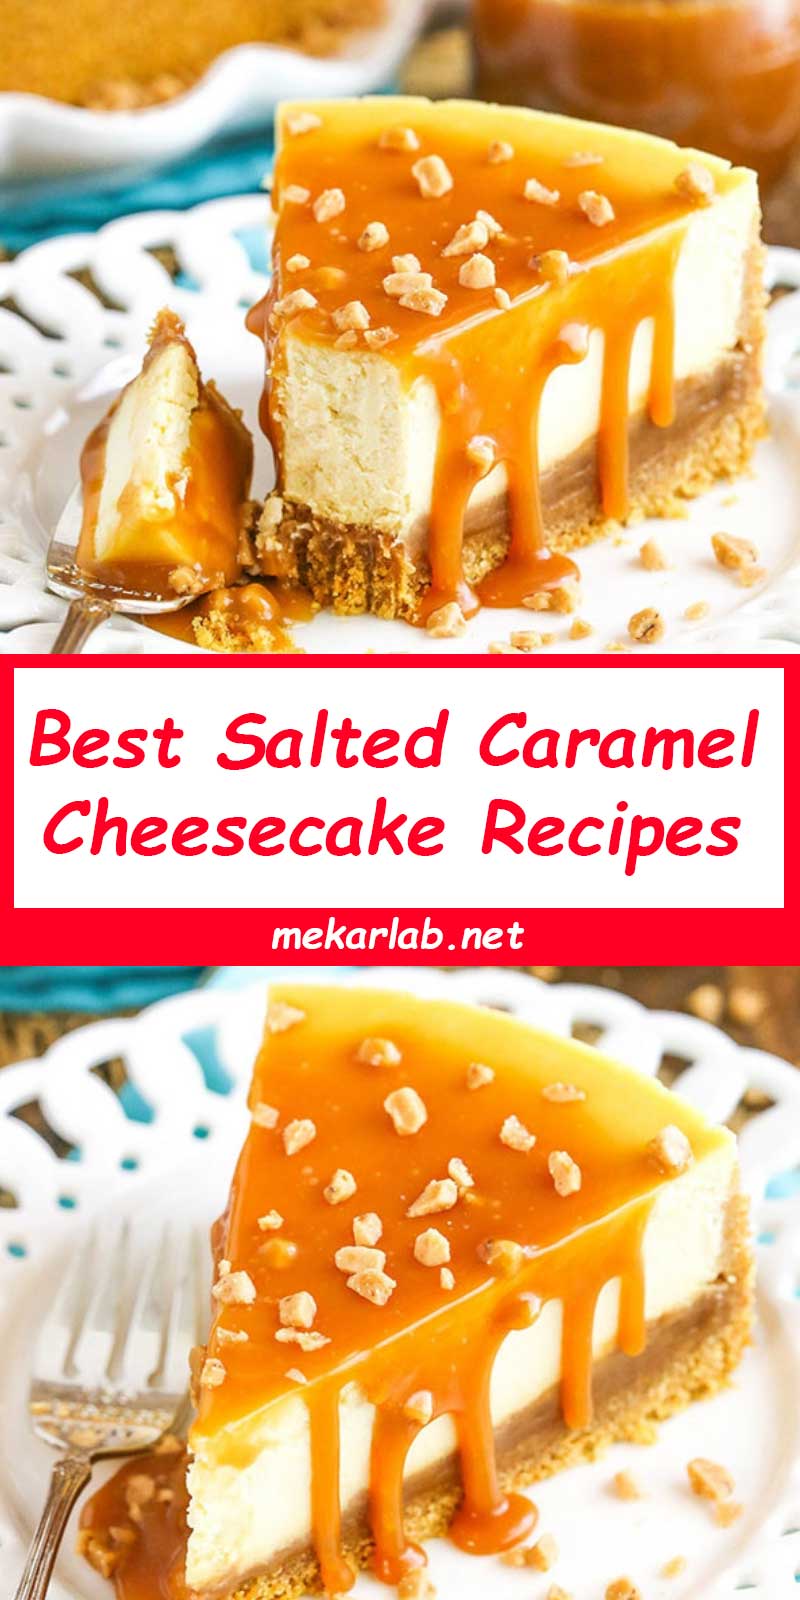 Best Salted Caramel Cheesecake Recipes